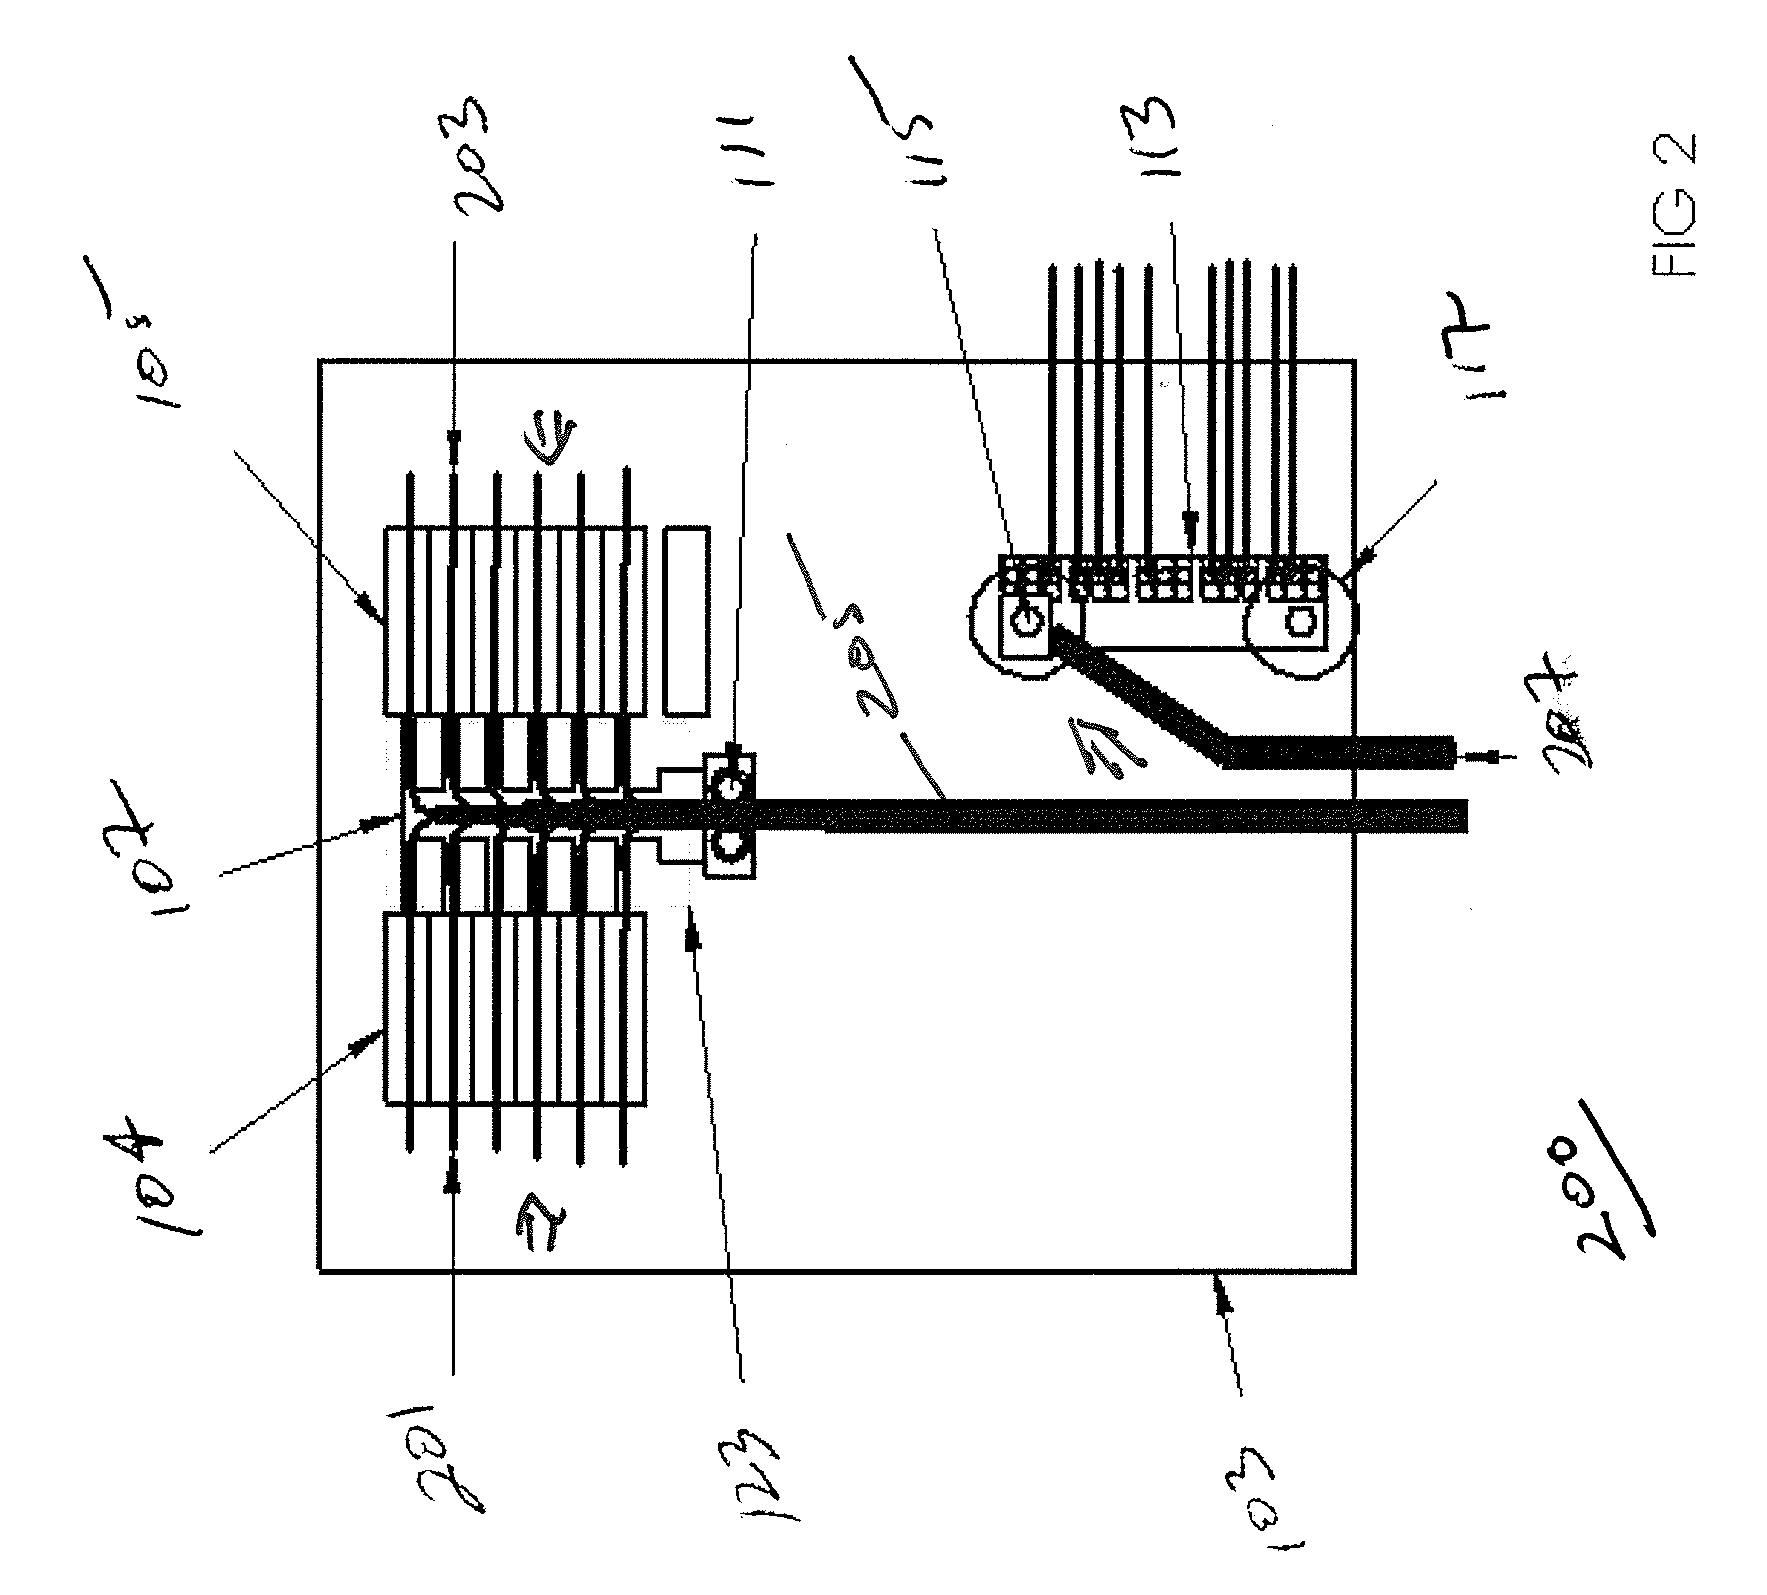 Non-contact magnetic current sensing and distribution system for determining individual power readings from a plurality of power sources